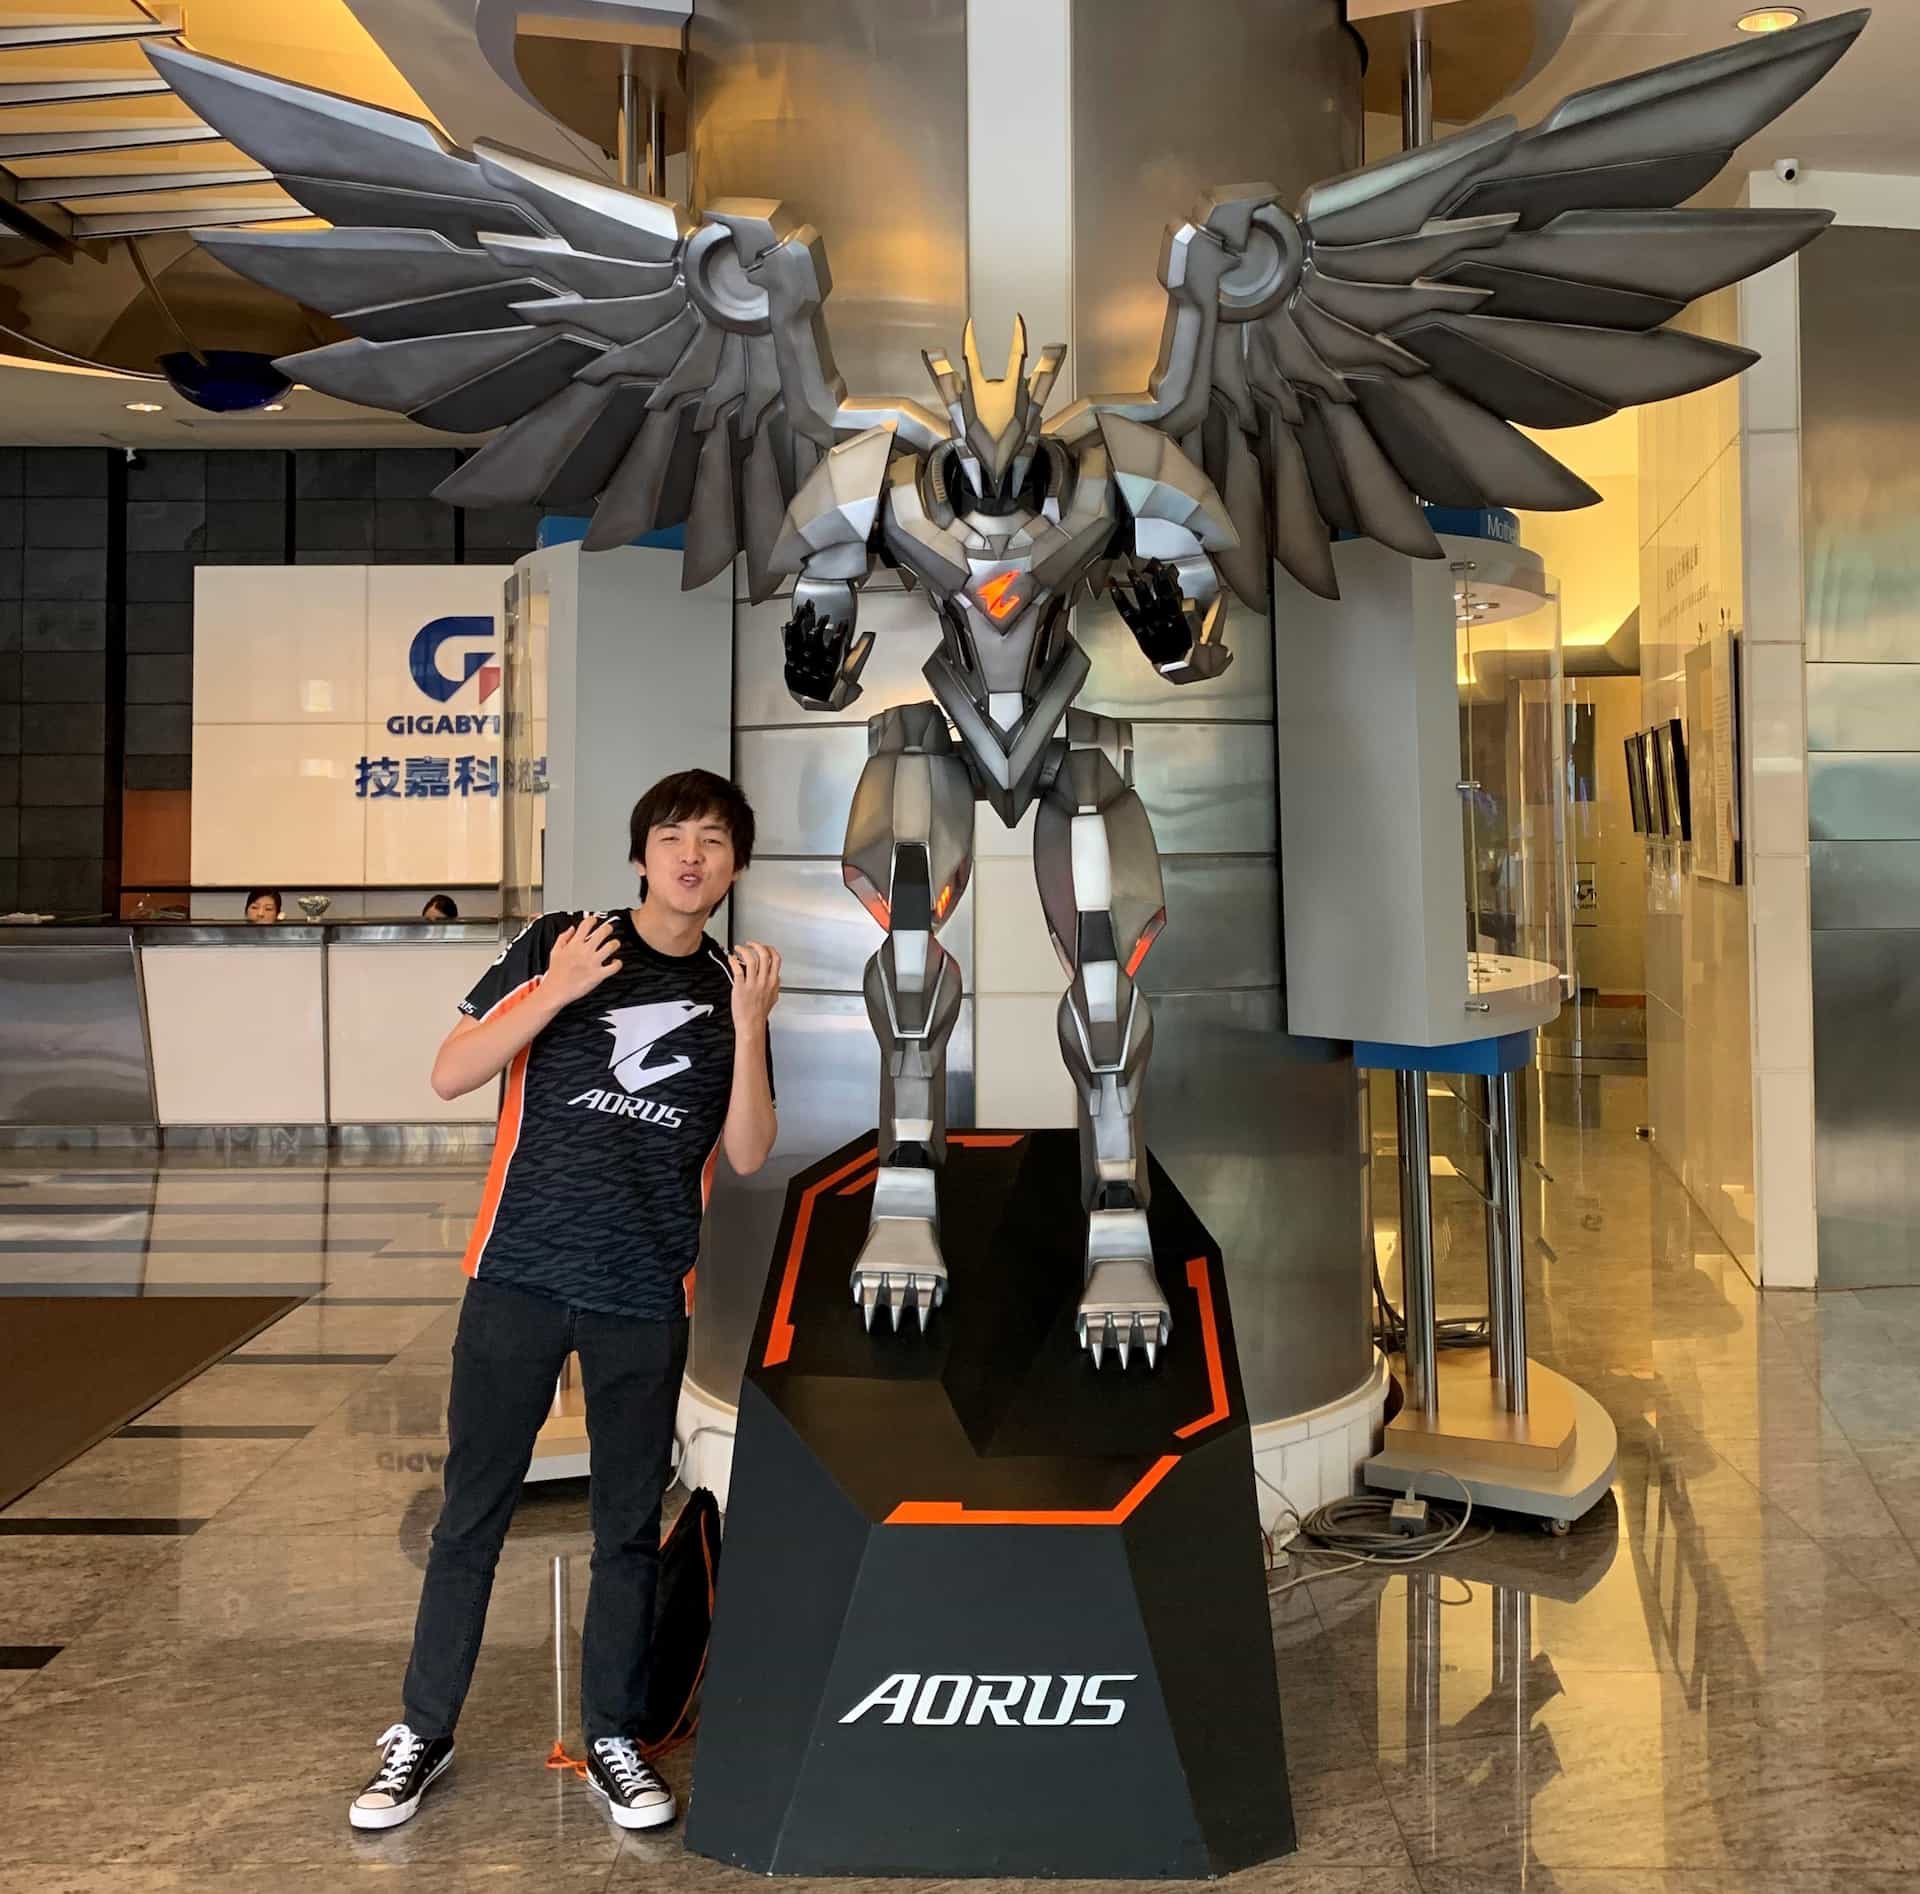 【Member Submission】Ace's AORUS Journey